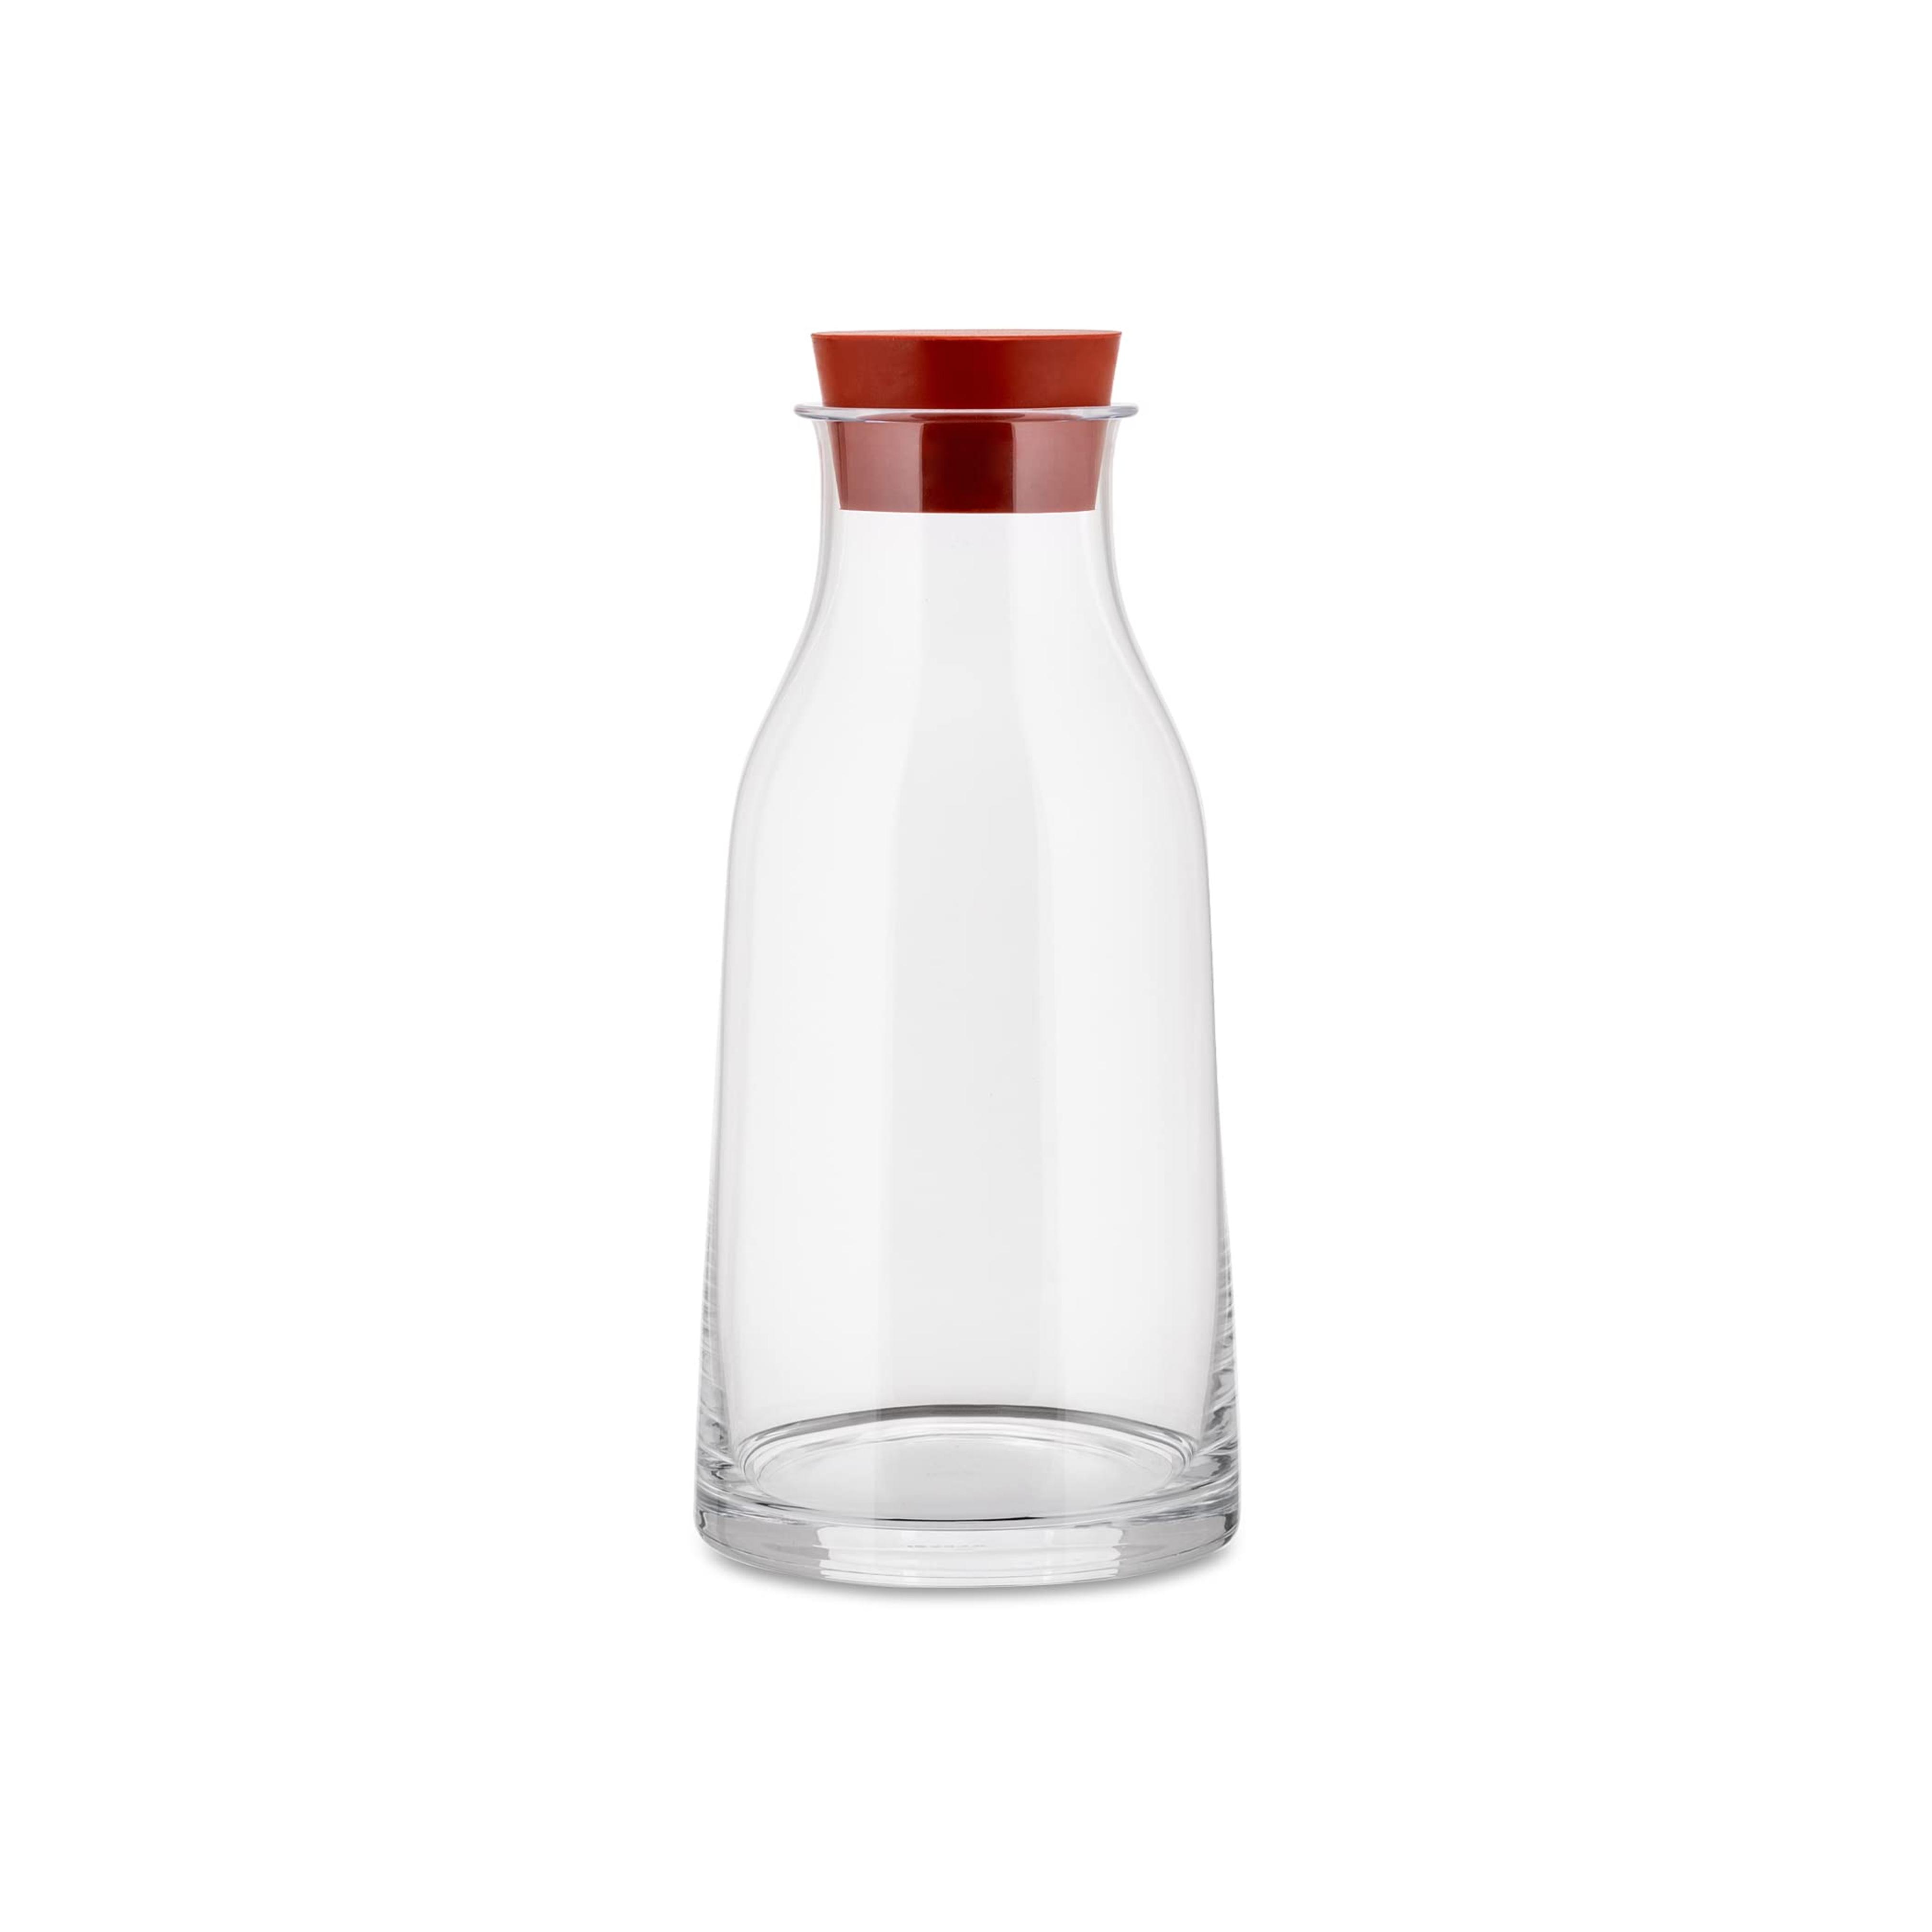 Tonale Carafe by David Chipperfield